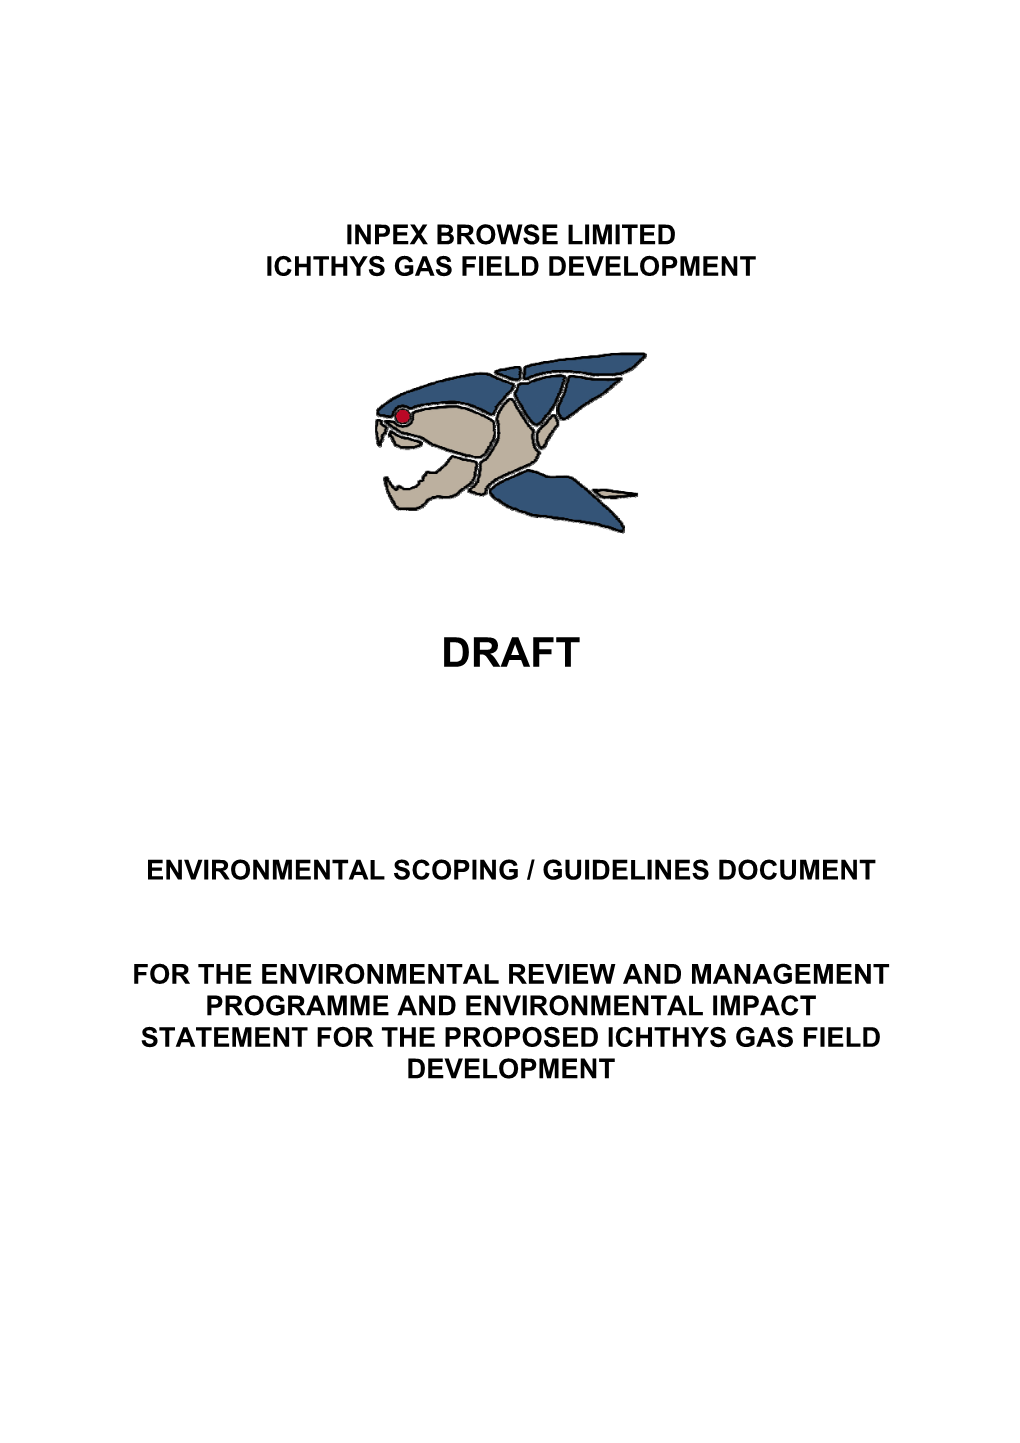 Environmental Scoping / Guidelines Document For